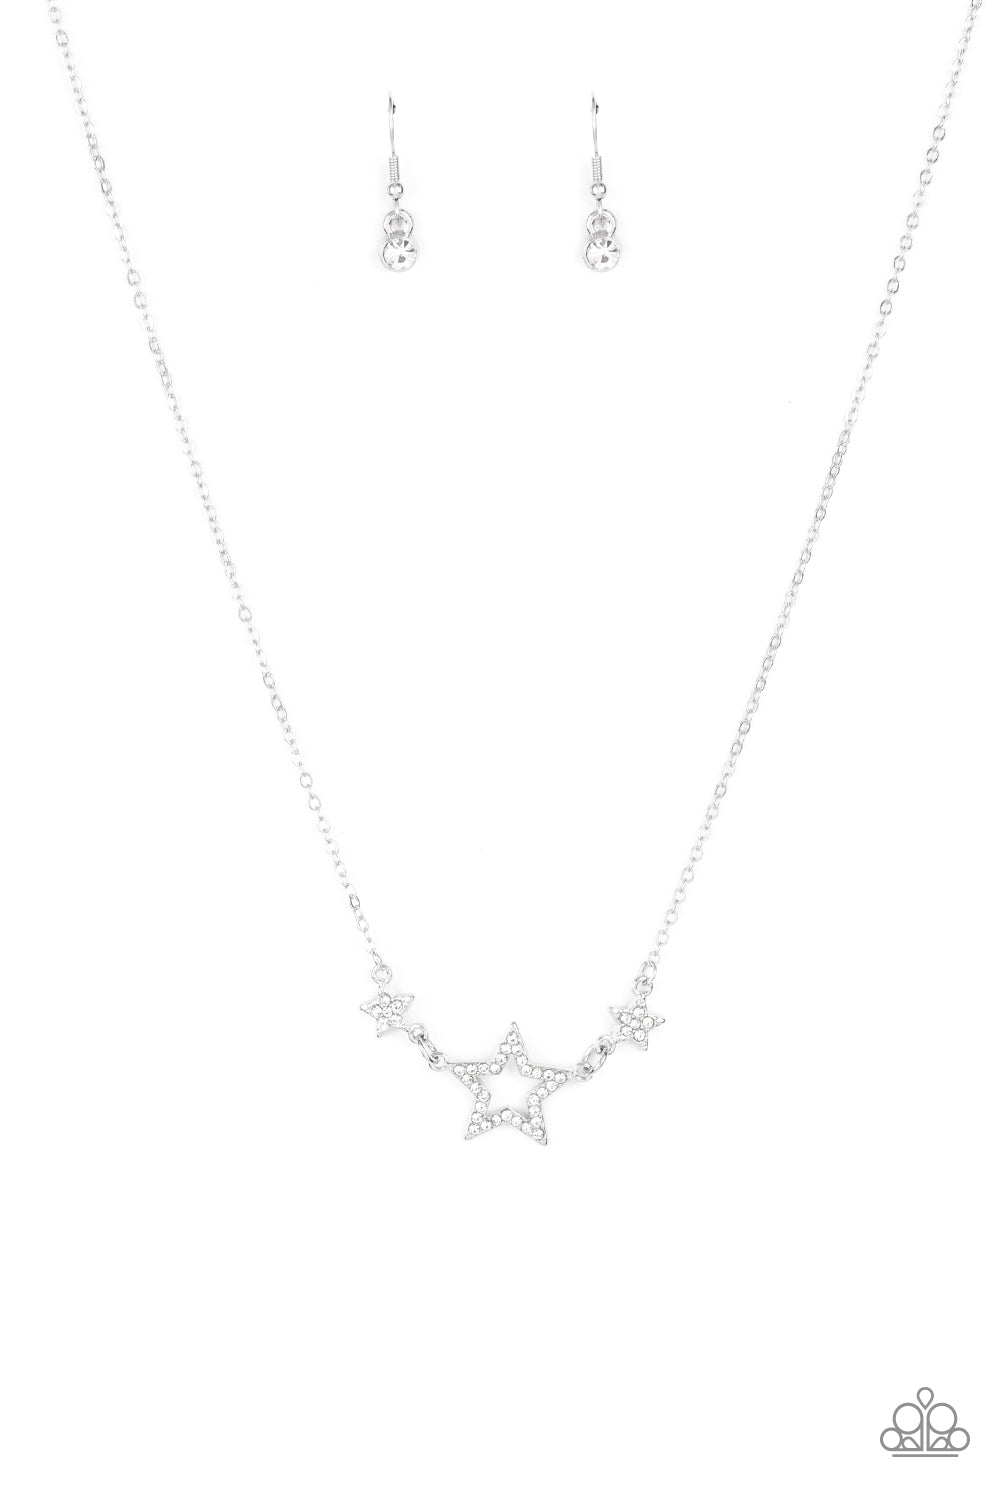 United We Sparkle - White Rhinestone Encrusted Silver Star Paparazzi Necklace & matching earrings